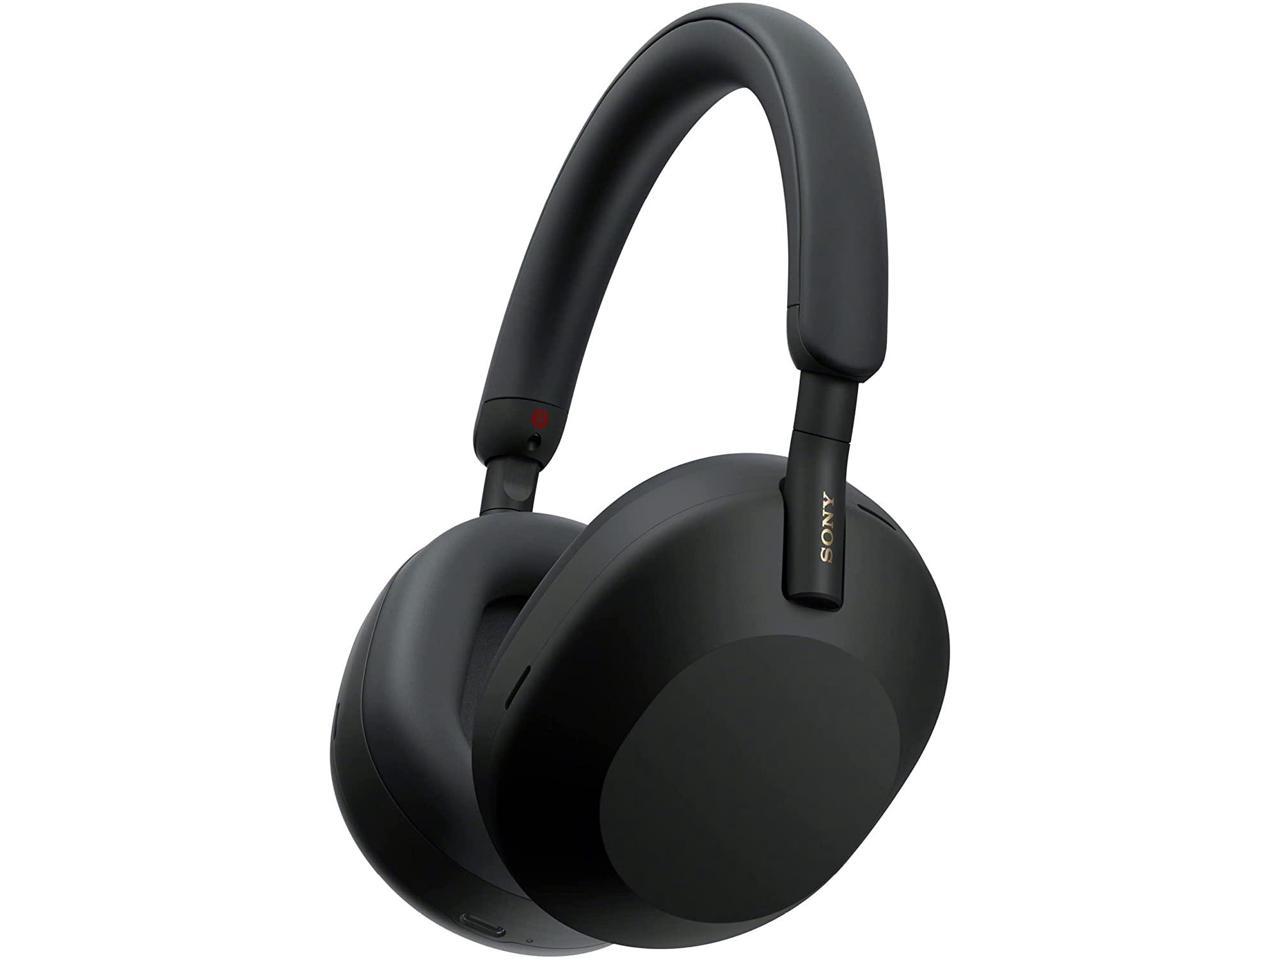 Sony WH-1000XM5 Wireless Industry Leading Noise Canceling Headphones with Auto Noise Canceling Optimizer, Crystal Clear Hands-Free Calling, and Alexa Voice Control, Black